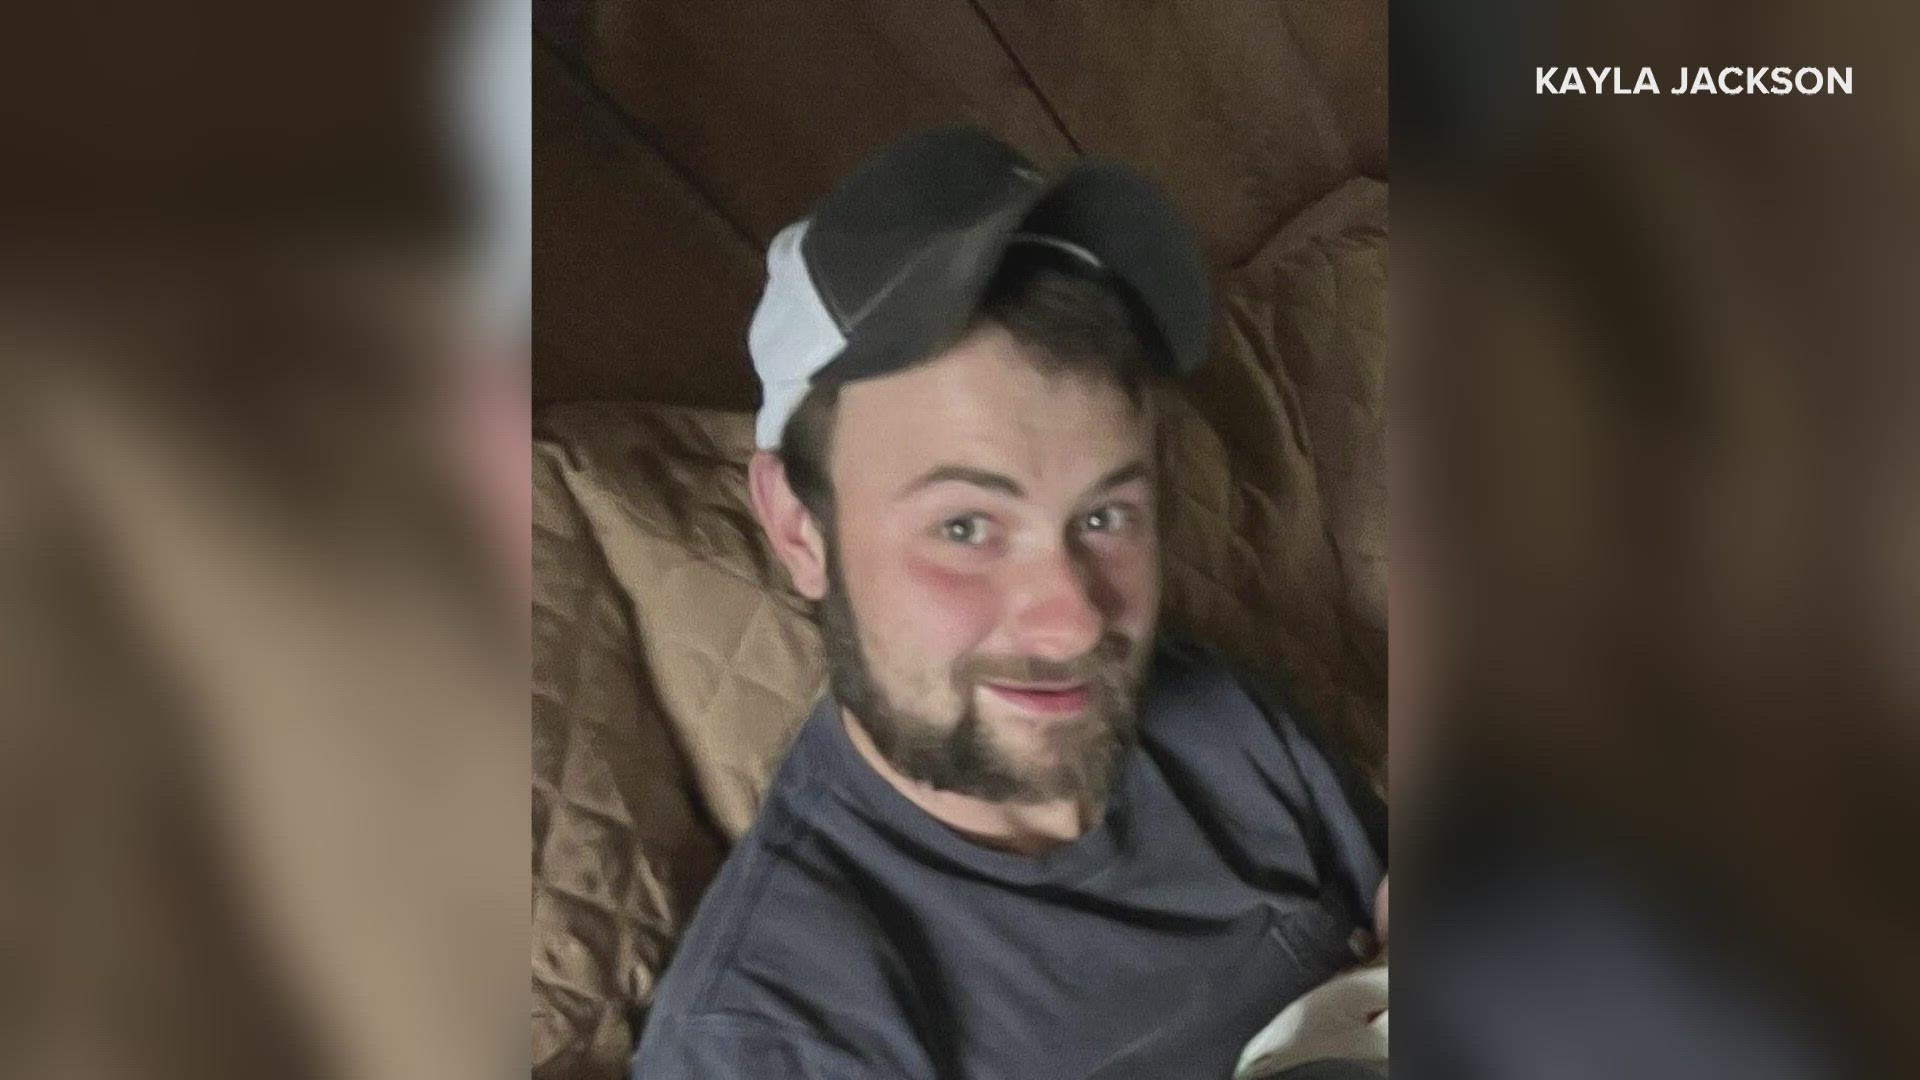 "He has not been in contact with family or friends, and his cellphone is currently going straight to voicemail," police said.